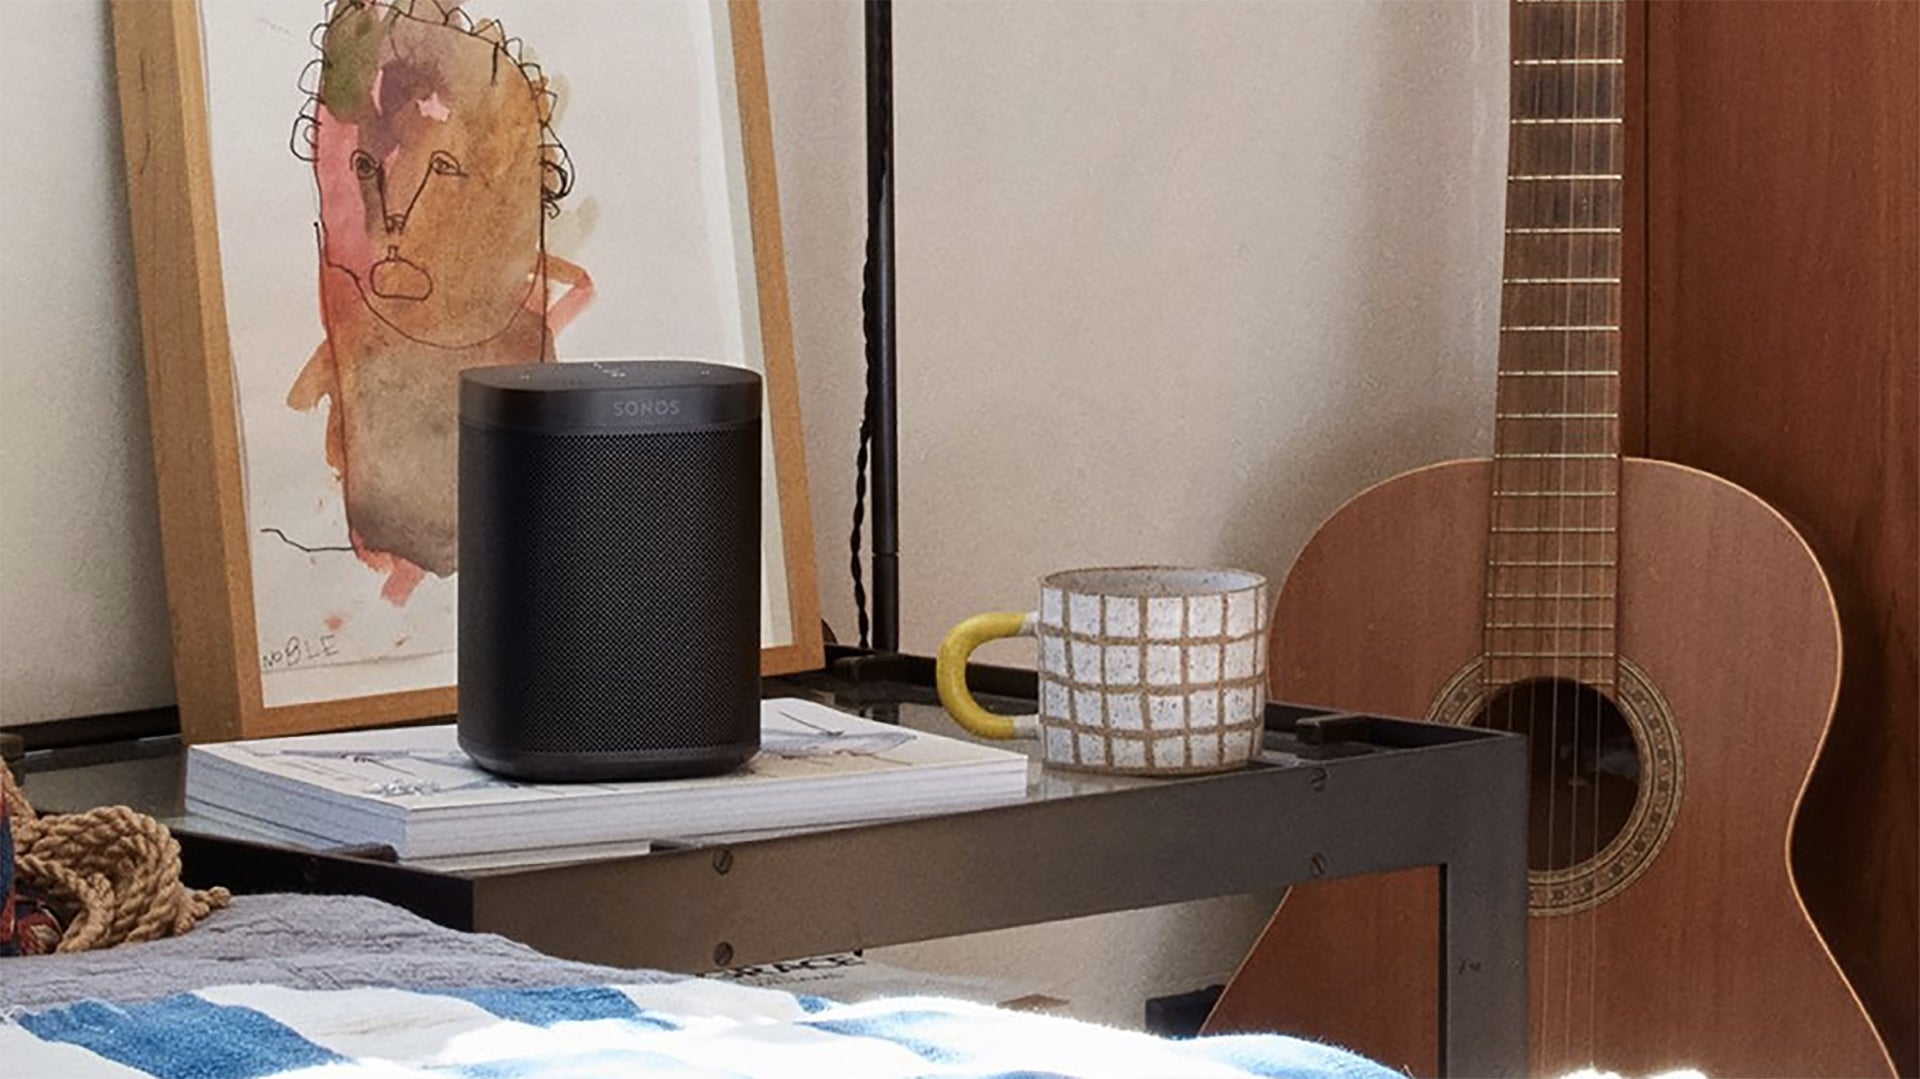 Sonos not working? How to fix common Sonos